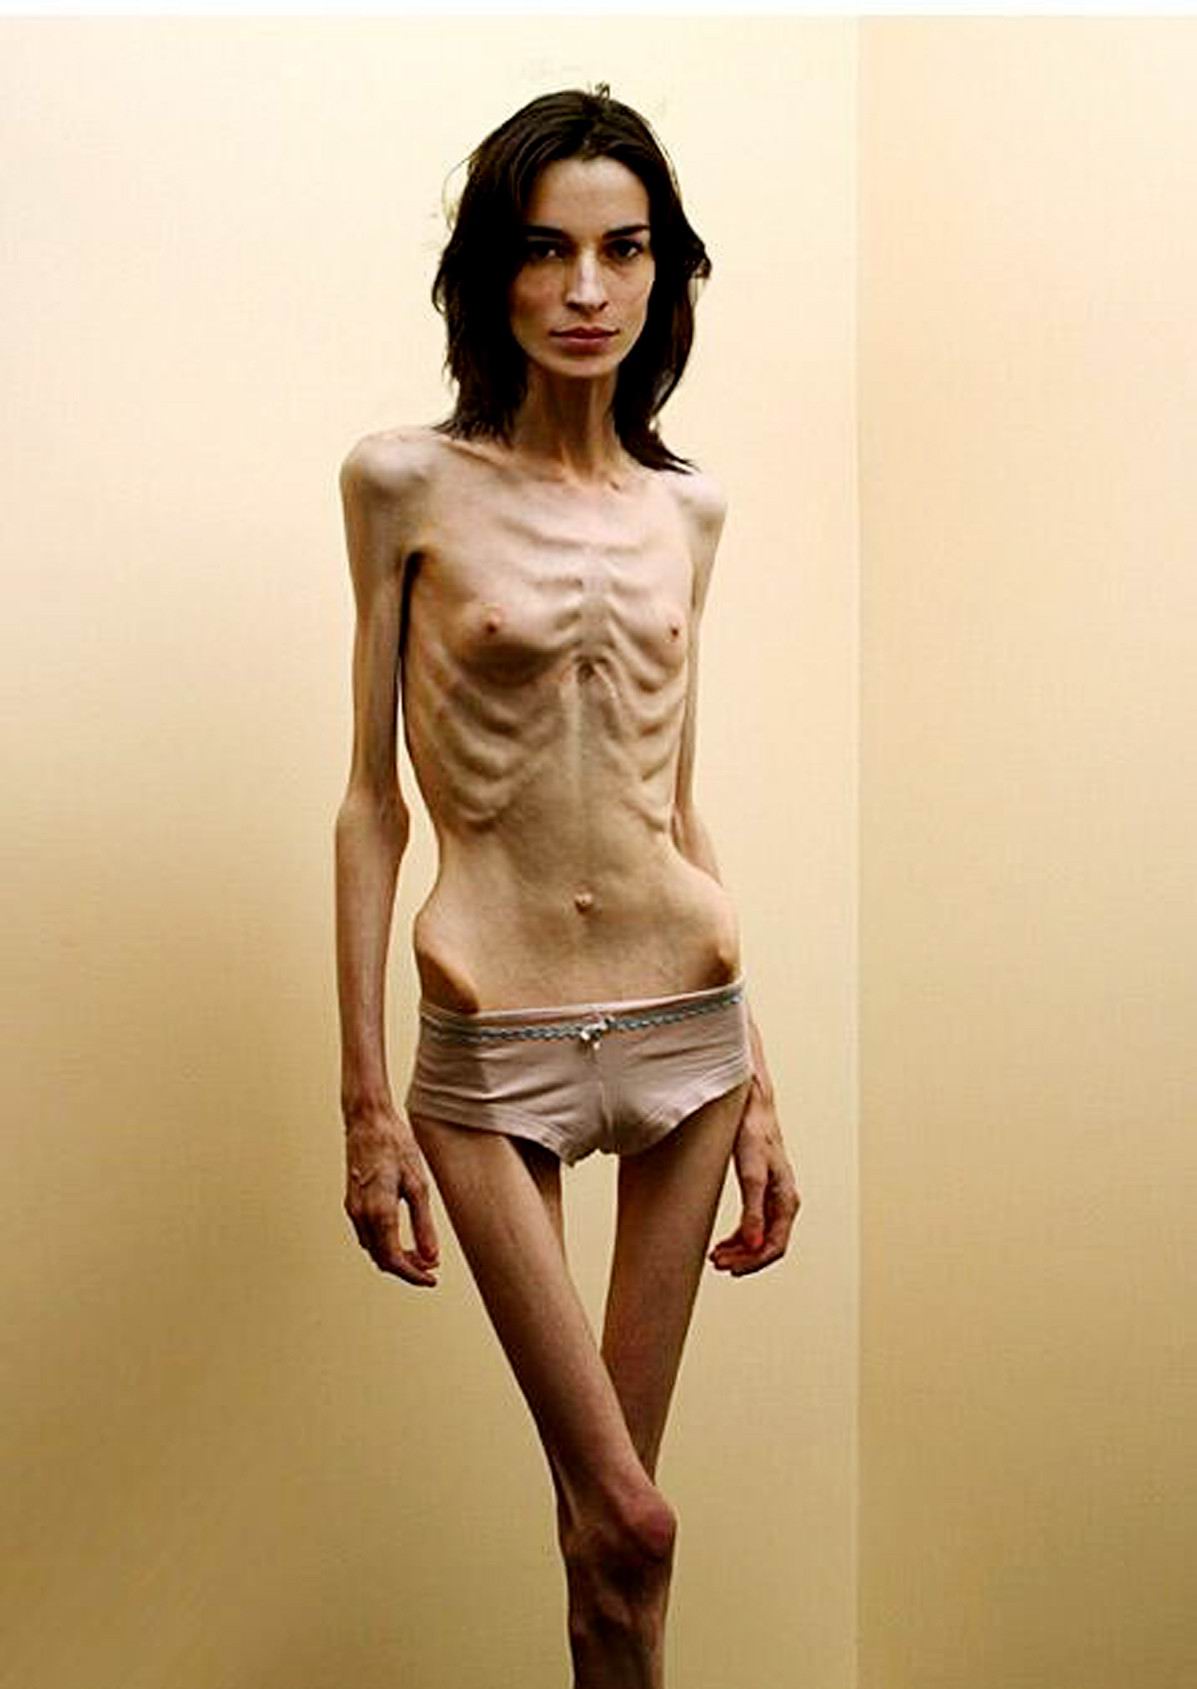 Free pictures and videos of anorexic teens 3